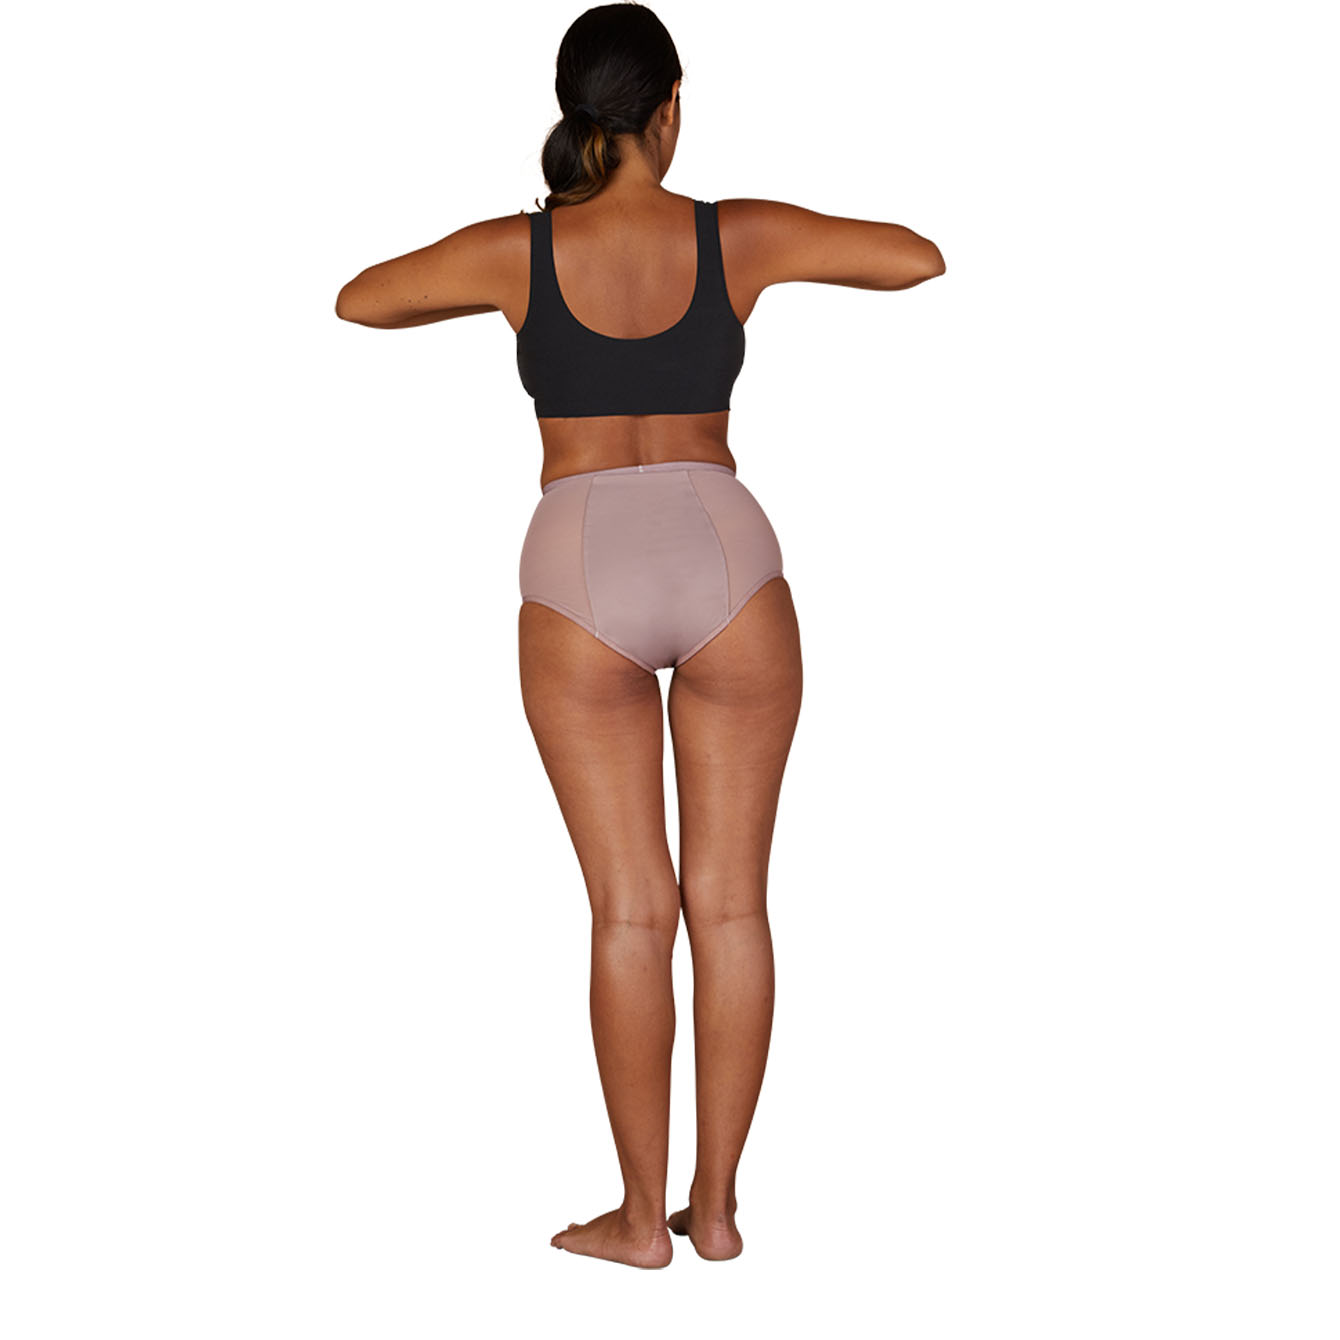 The Thong Period. in Sporty Stretch For Light Flows